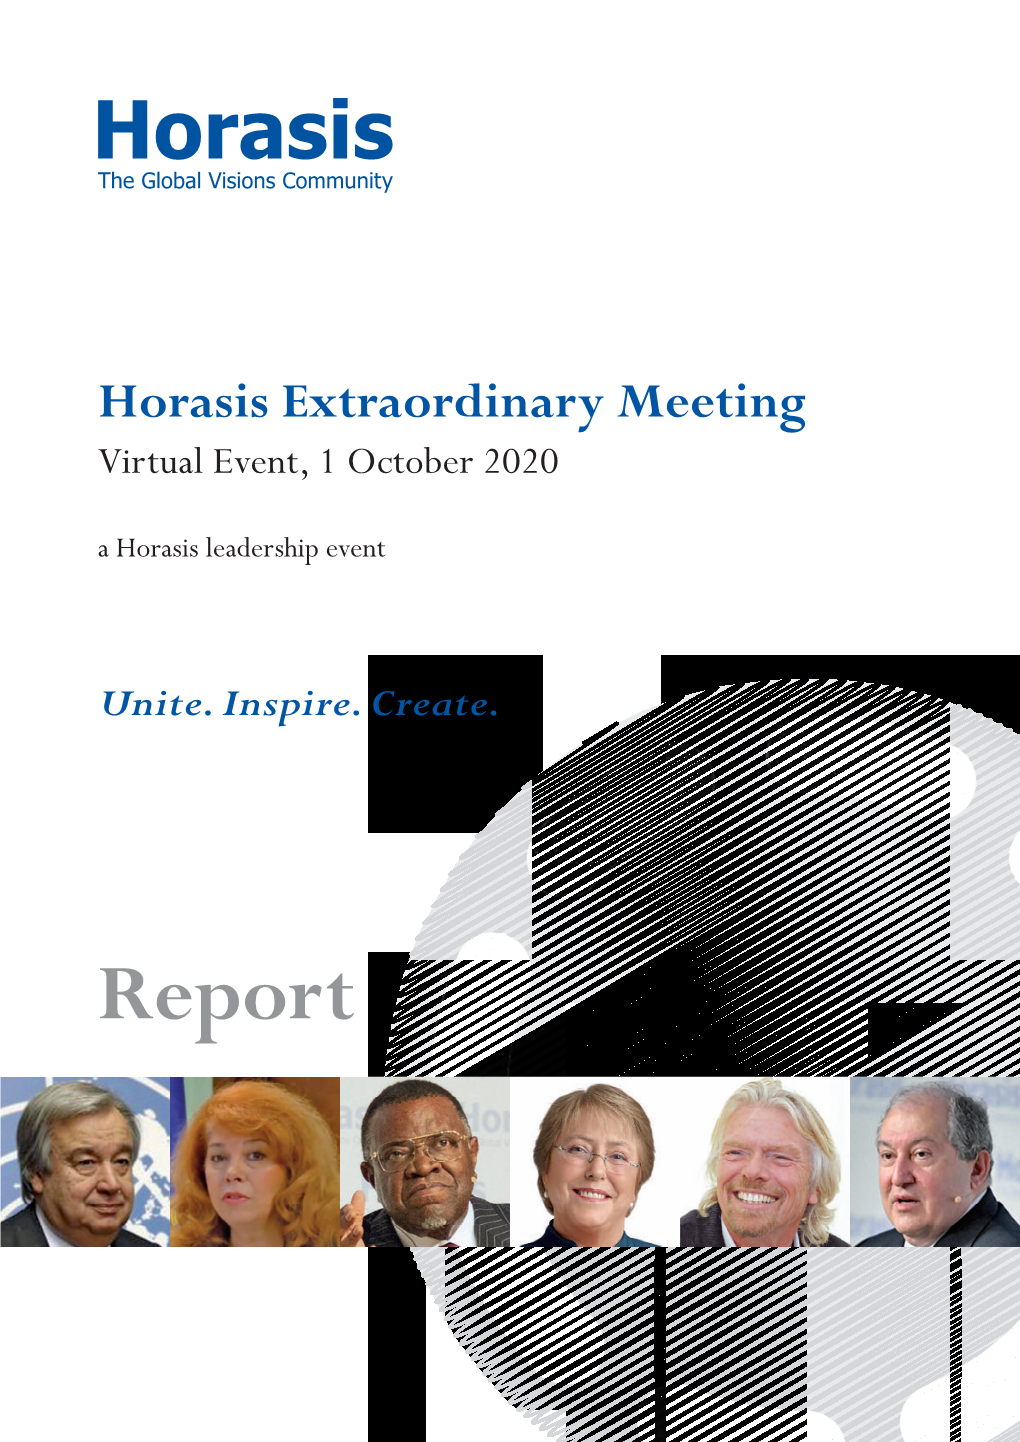 Horasis Extraordinary Meeting Virtual Event, 1 October 2020 a Horasis Leadership Event